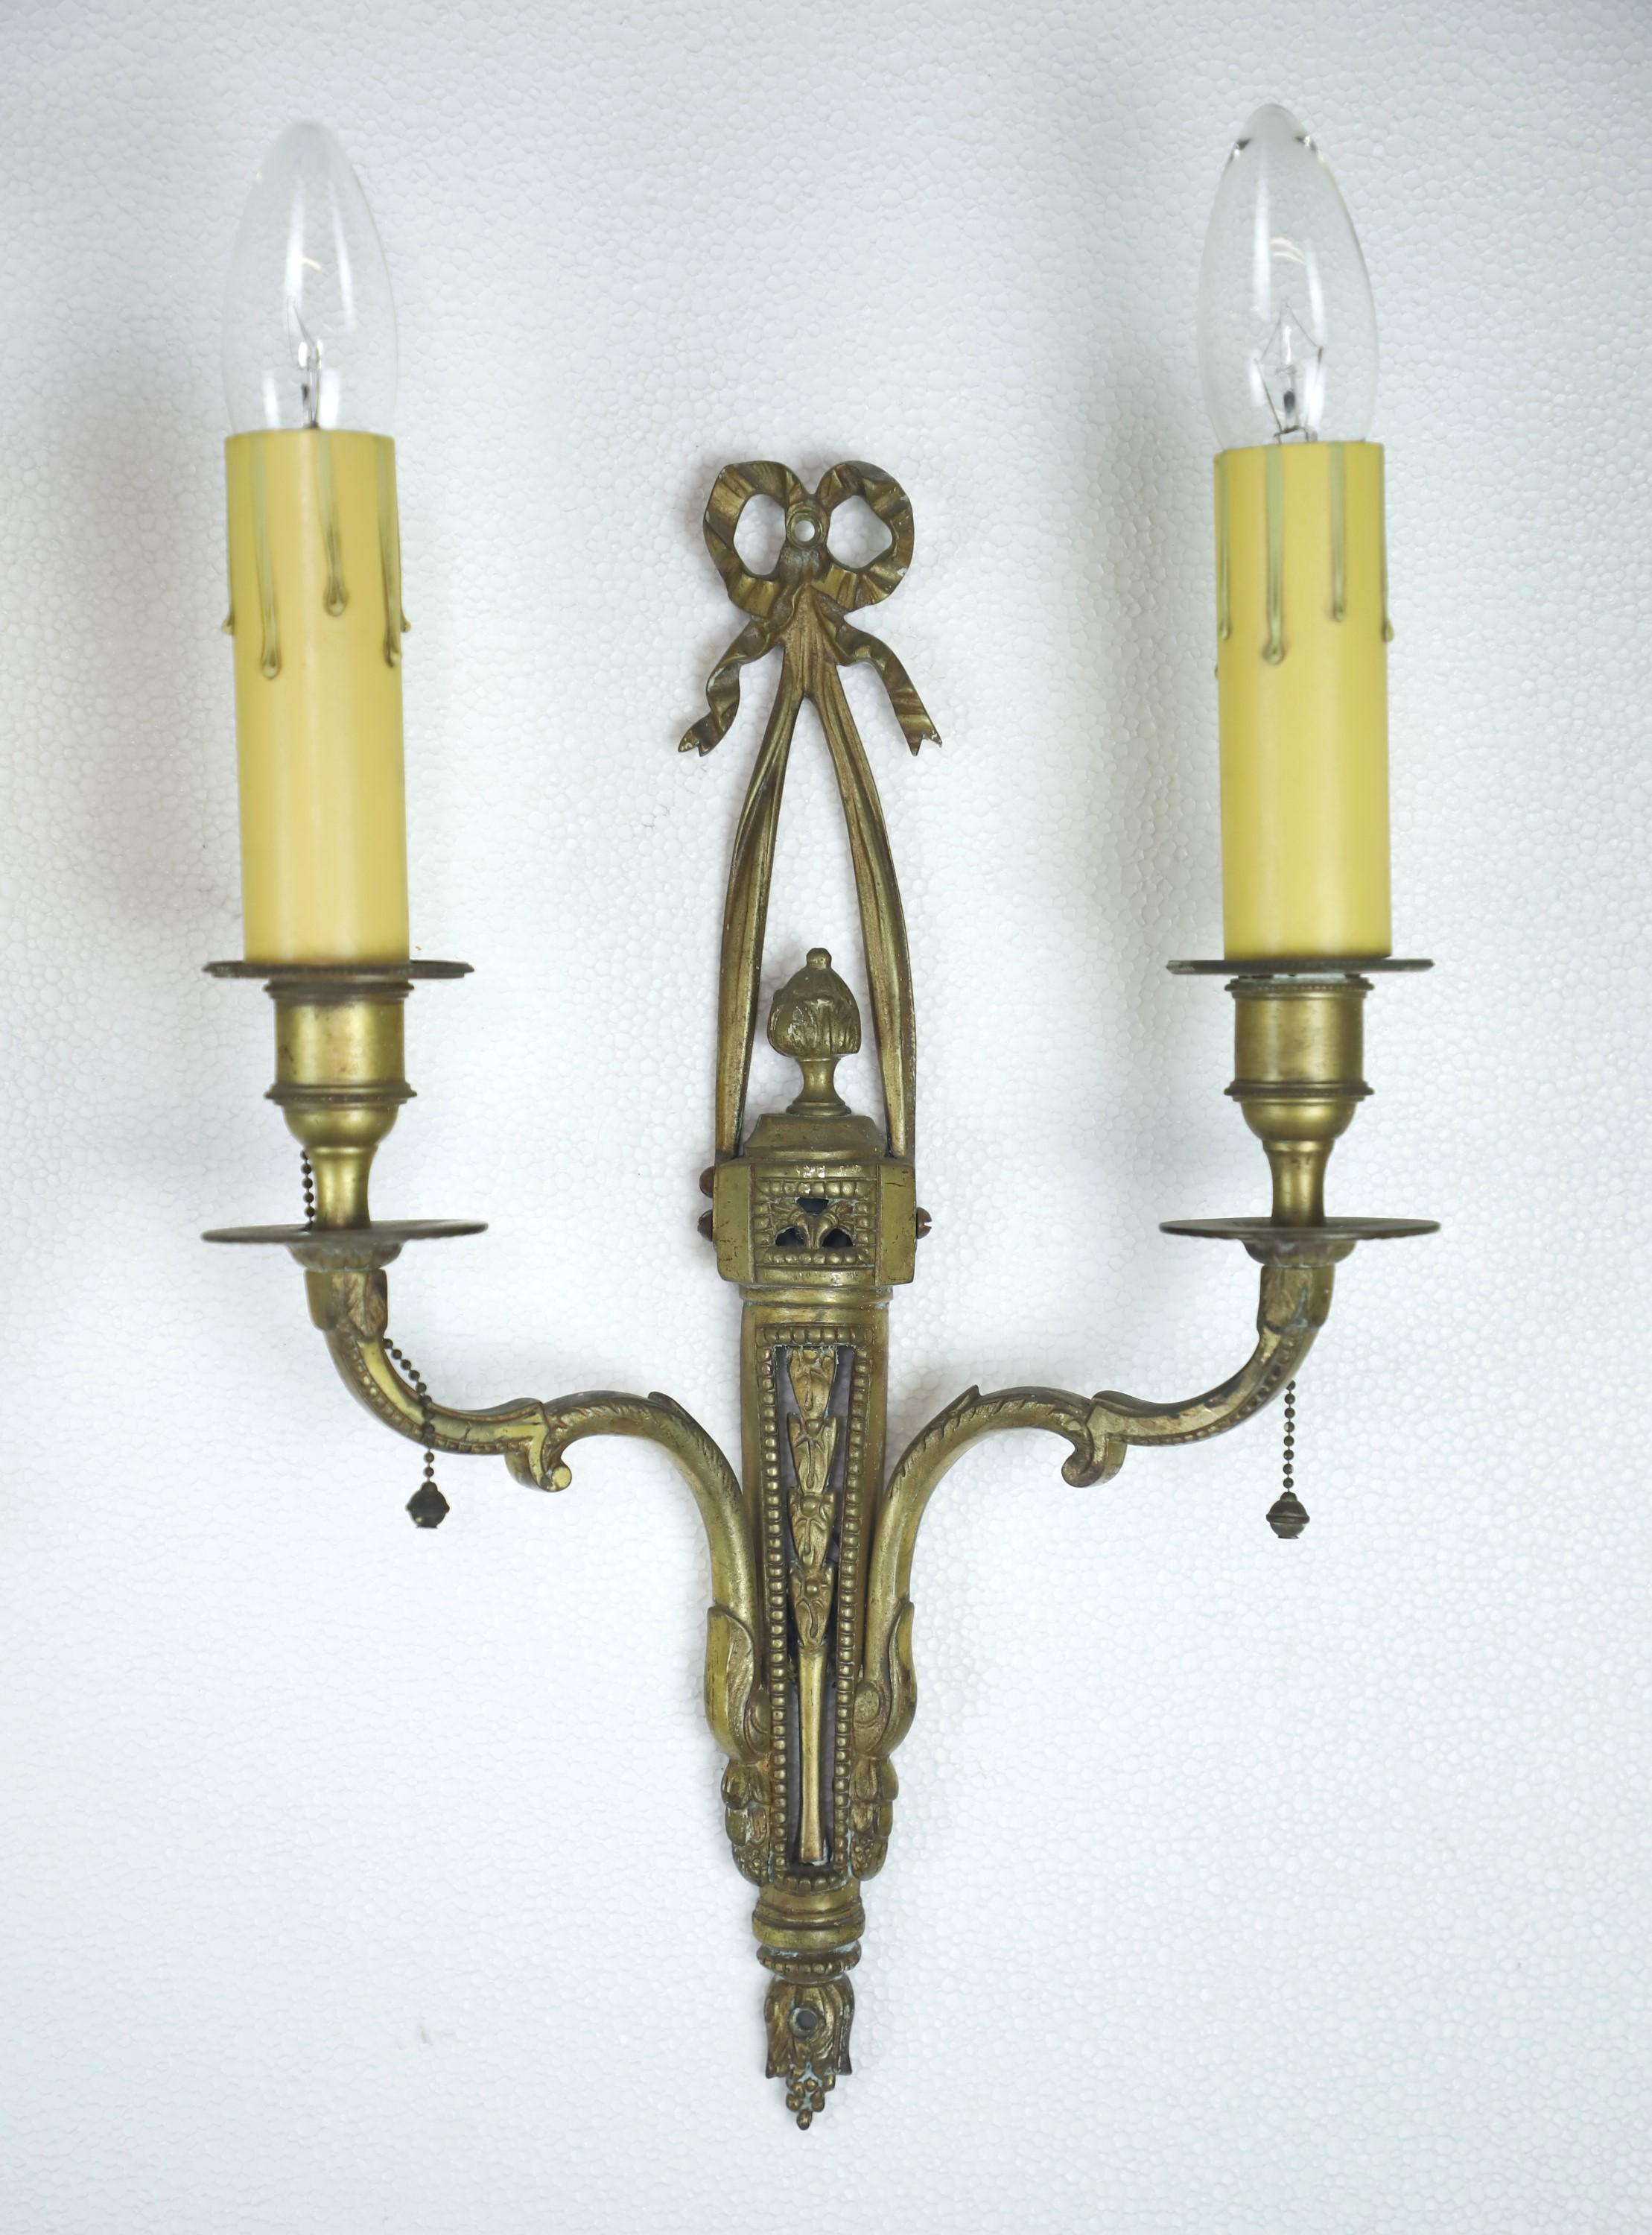 Neoclassical lighting is characterized by elegant, symmetrical designs inspired by ancient Greek and Roman art, often featuring decorative elements such as columns, foliate, and urns. These two arm brass candlestick wall sconces feature ornate